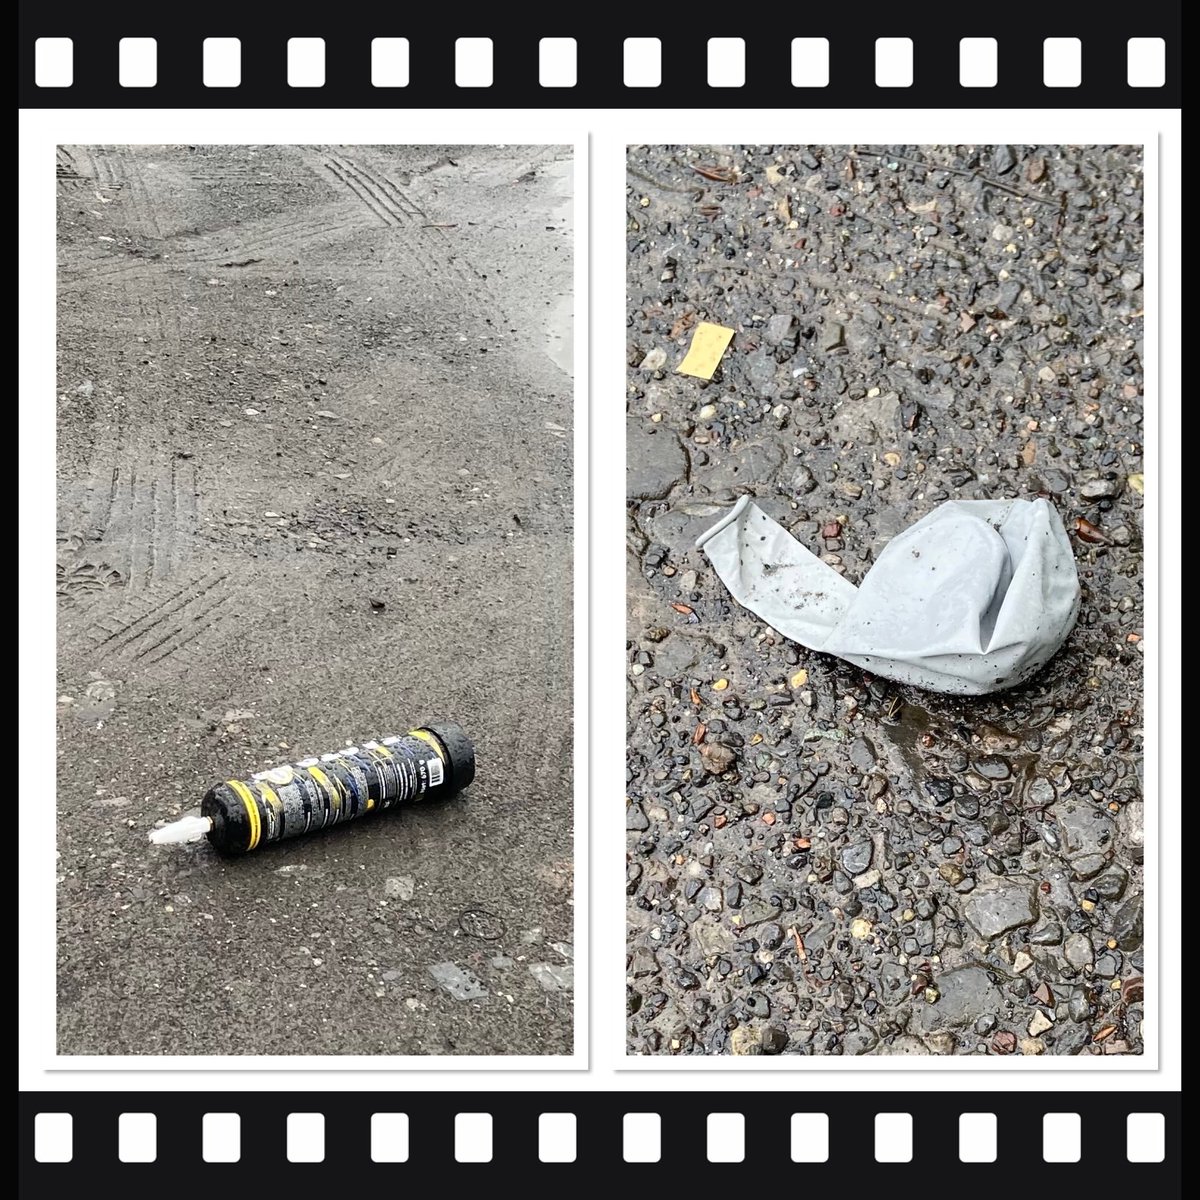 As we enjoy the lighter evenings, I was concerned this morning to see a discarded ‘Fastgas canister and balloon’ on my walk @dvcp ⁦@RCTCouncil⁩ Please advise your children of the dangers of inhaling this gas. Risks include unconsciousness or even death! ⁦@swpolice⁩